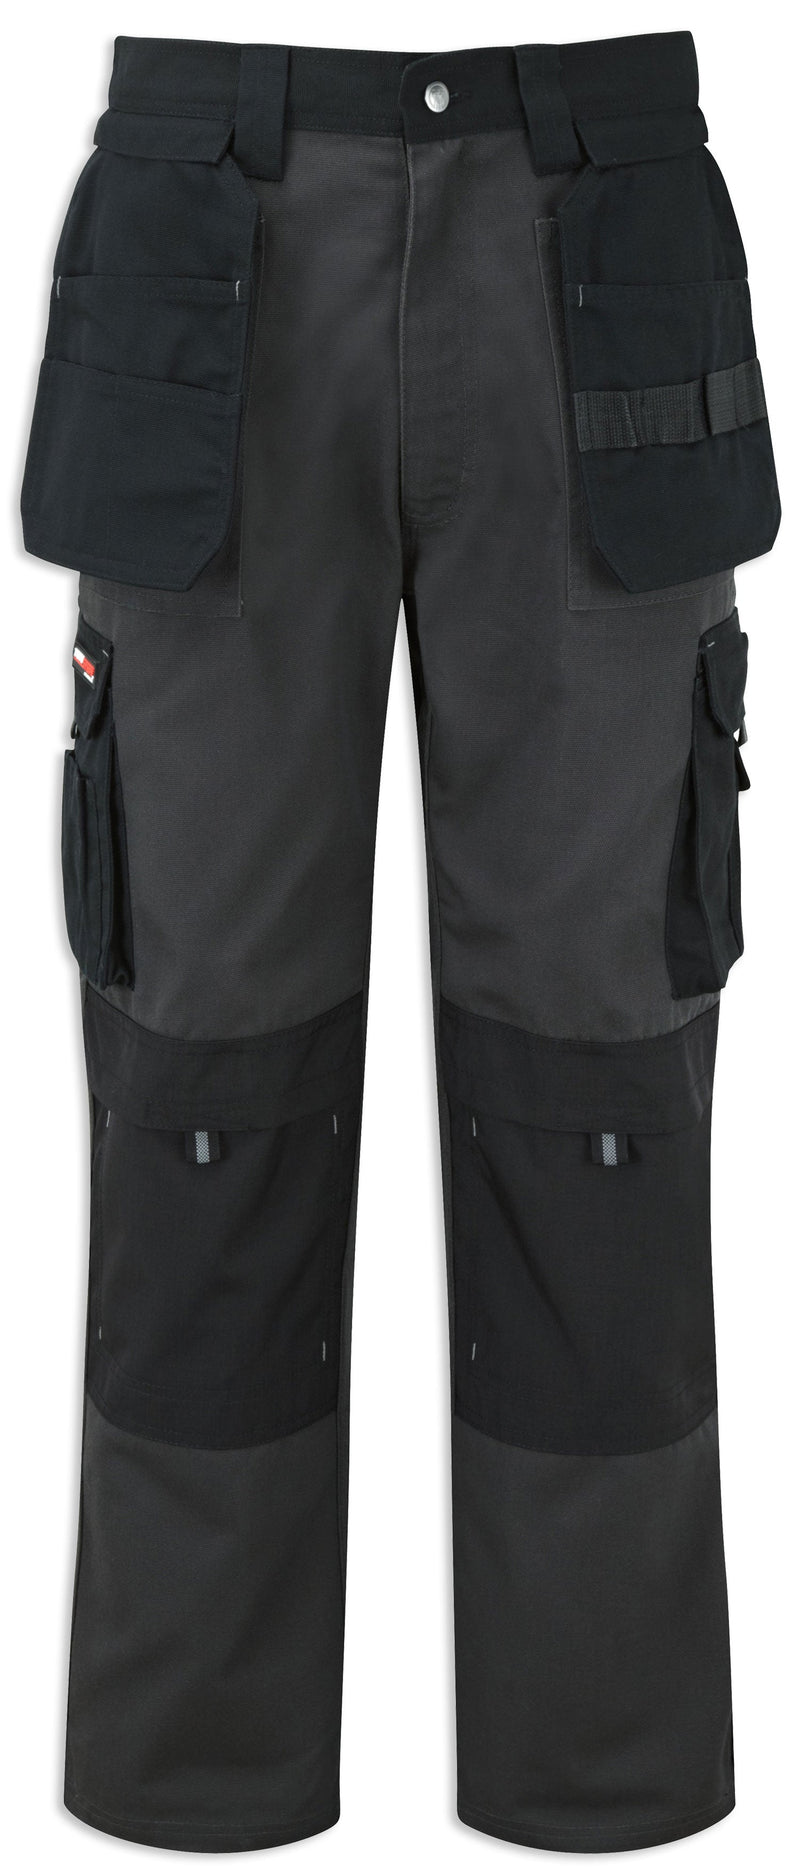 Grey Black Castle Tuffstuff Extreme Work Trousers